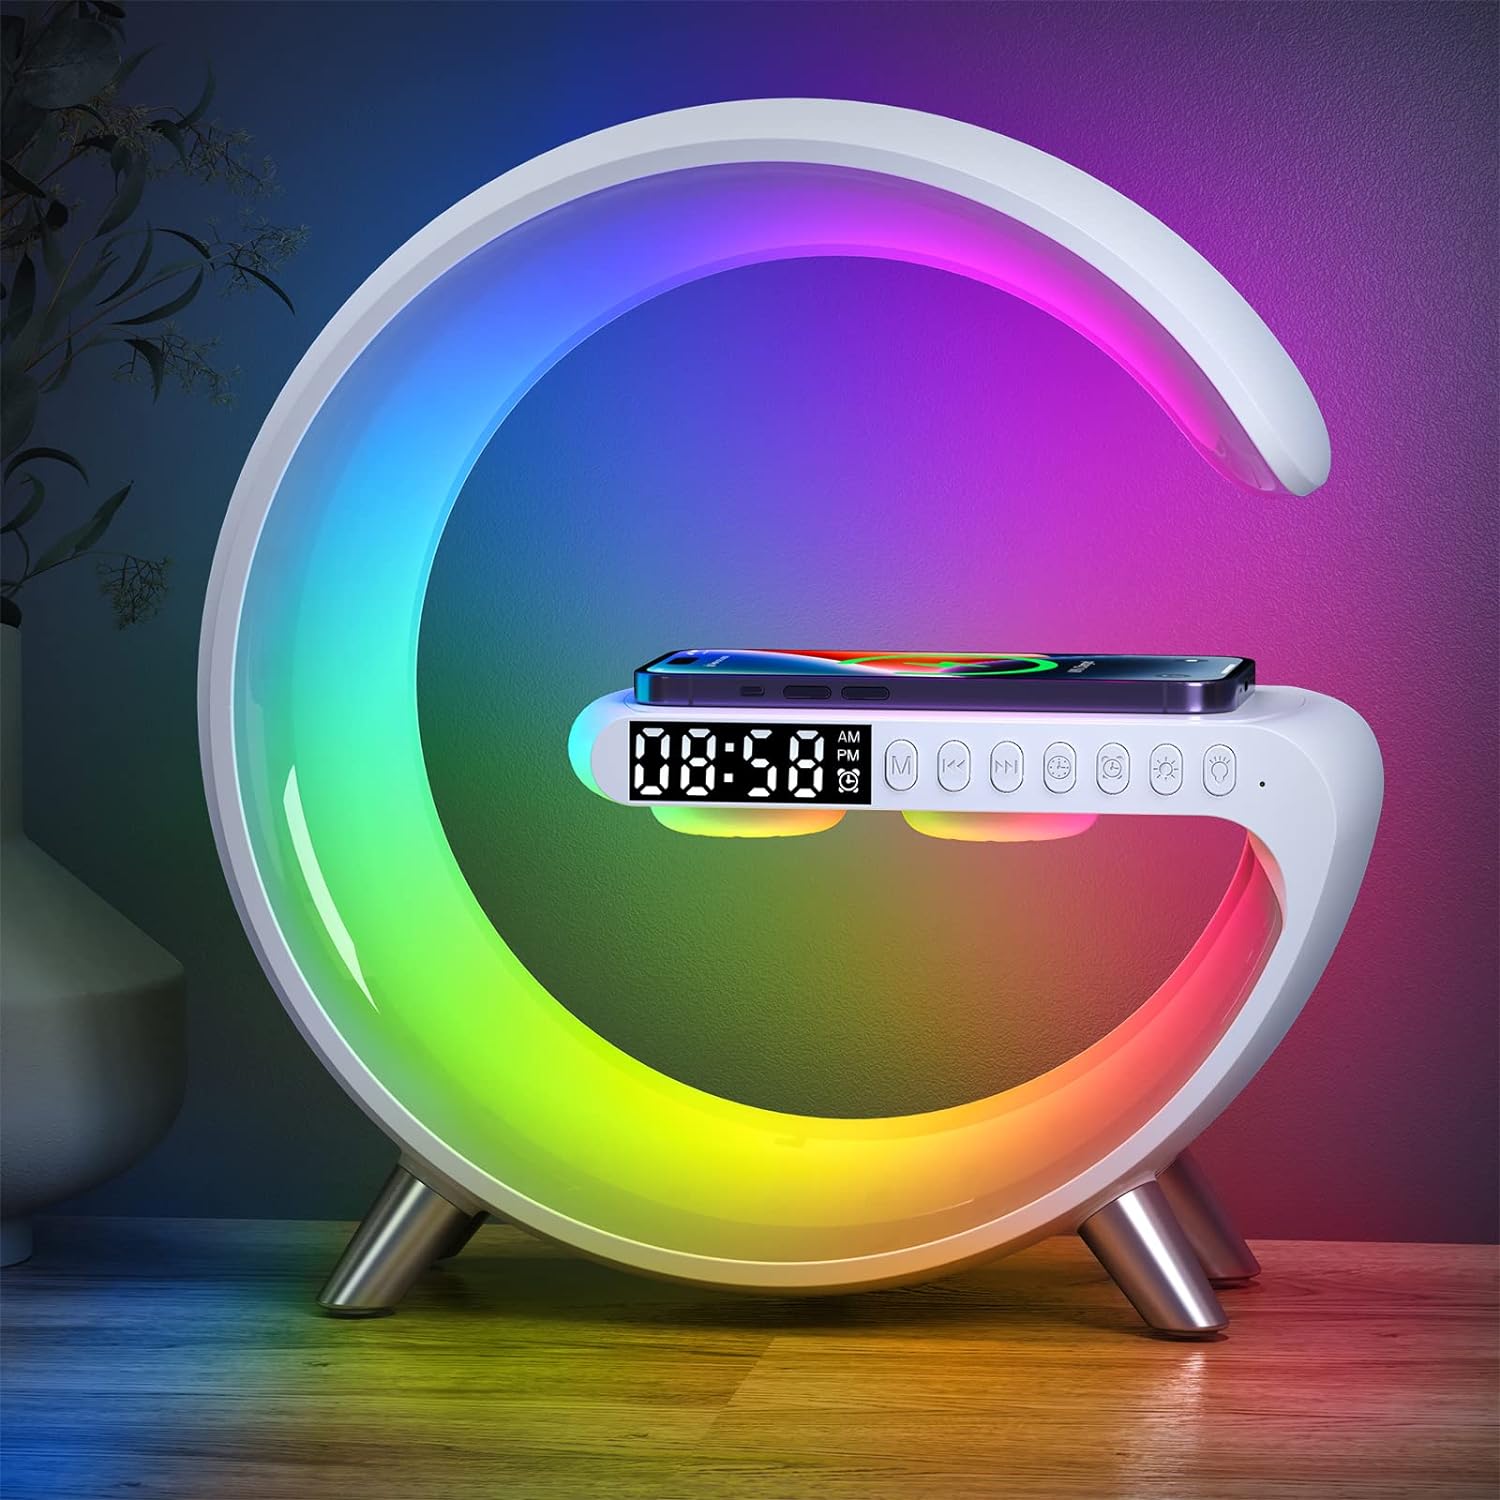 Big G Bluetooth speaker Atmosphere Lamp with Wireless Charger, Intelligent LED Table Lamp, Bluetooth Speaker, Dimmable Night Light, Touch Lamp, Alarm Clock with Music Sync, App Control